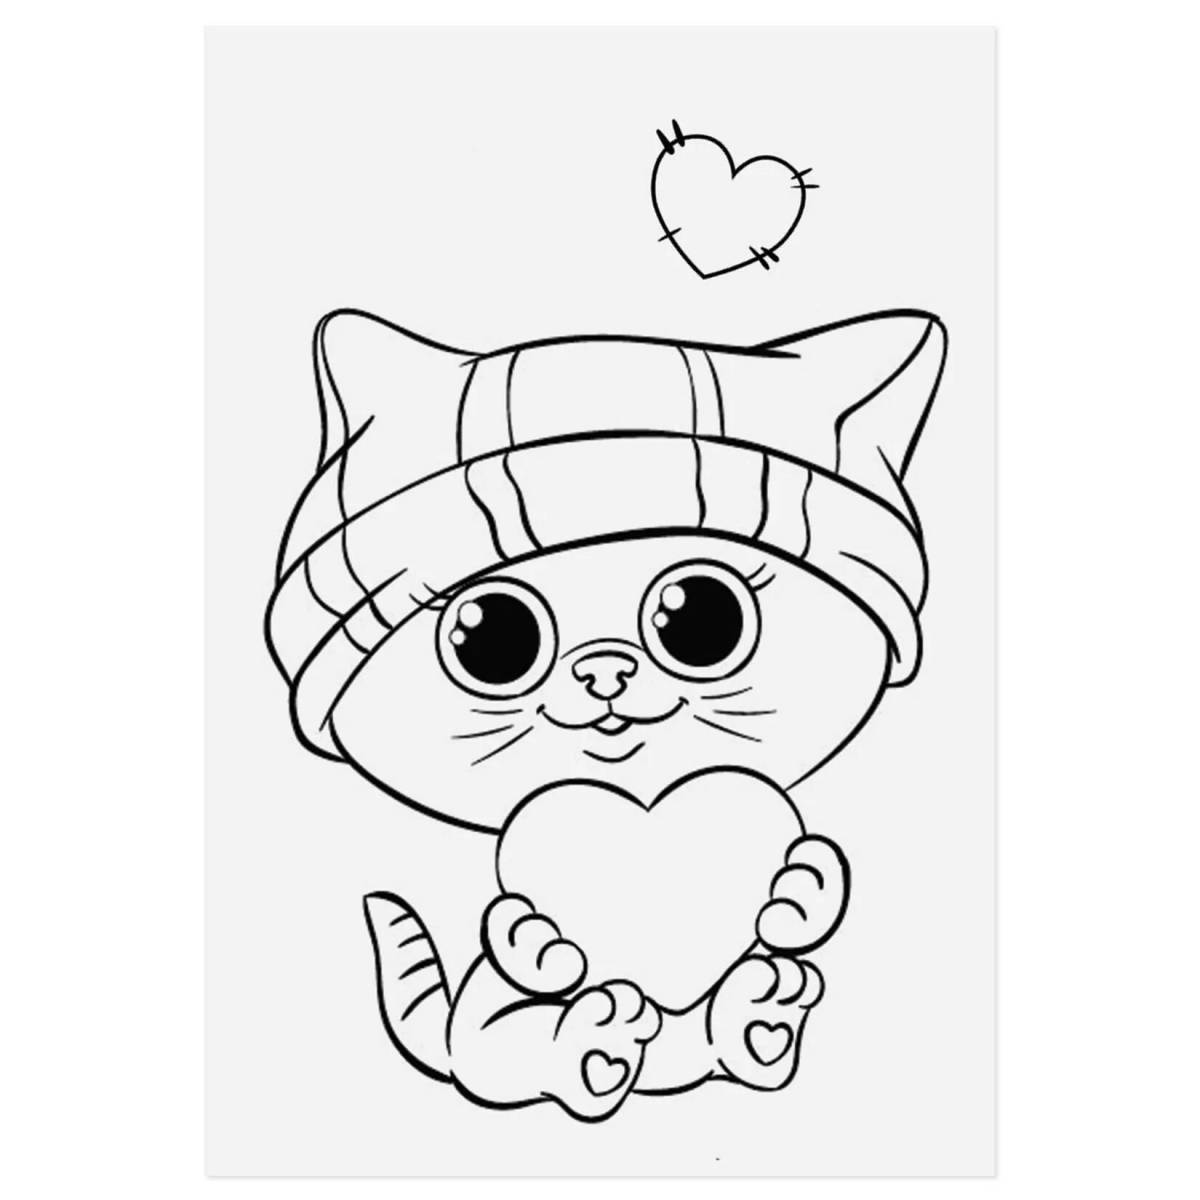 Cheerful cute cat coloring for kids